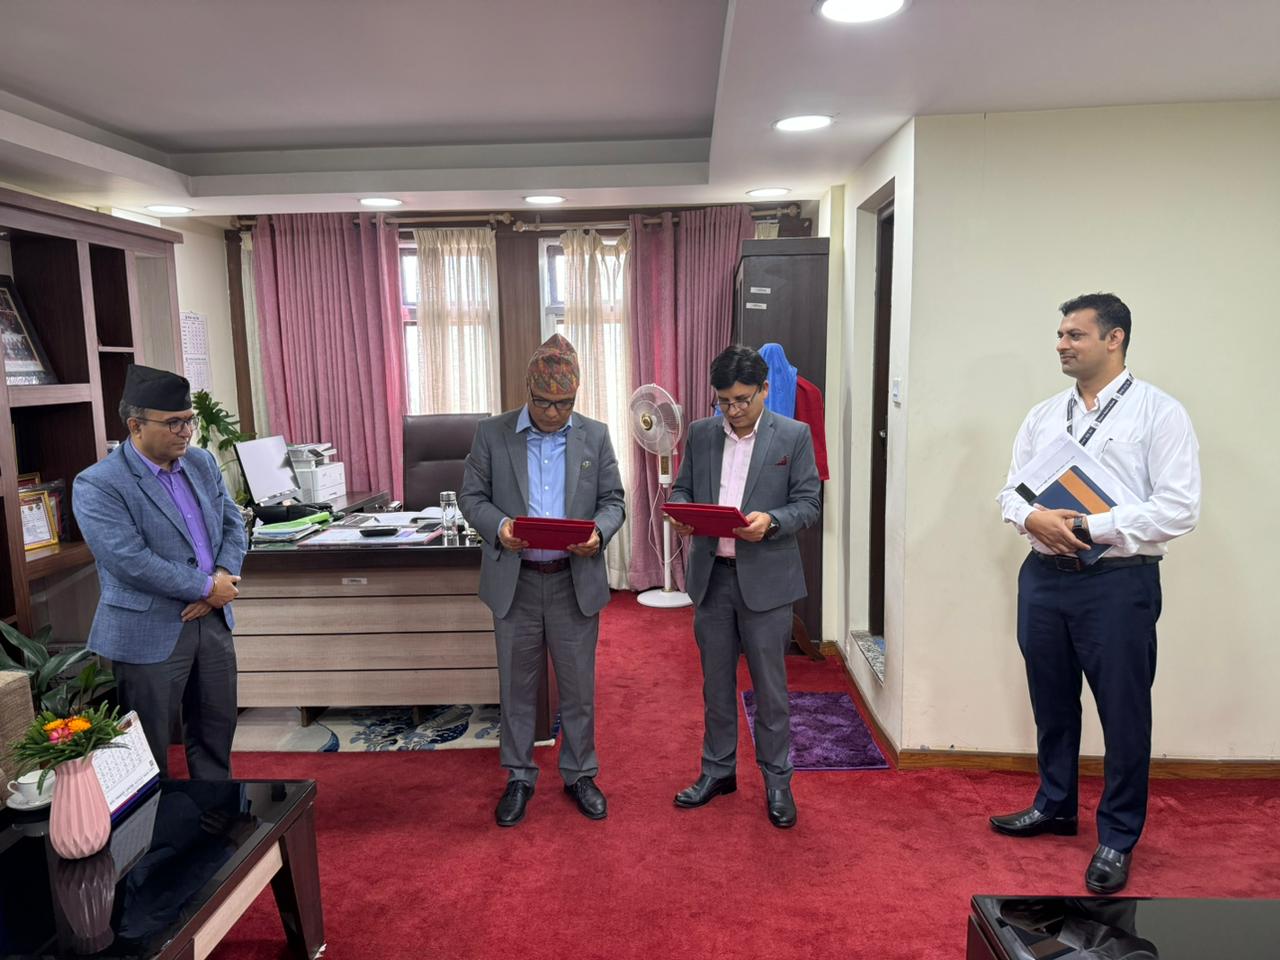 Ravin Kumar Nepal appointed Chair of SmartChoice Technologies